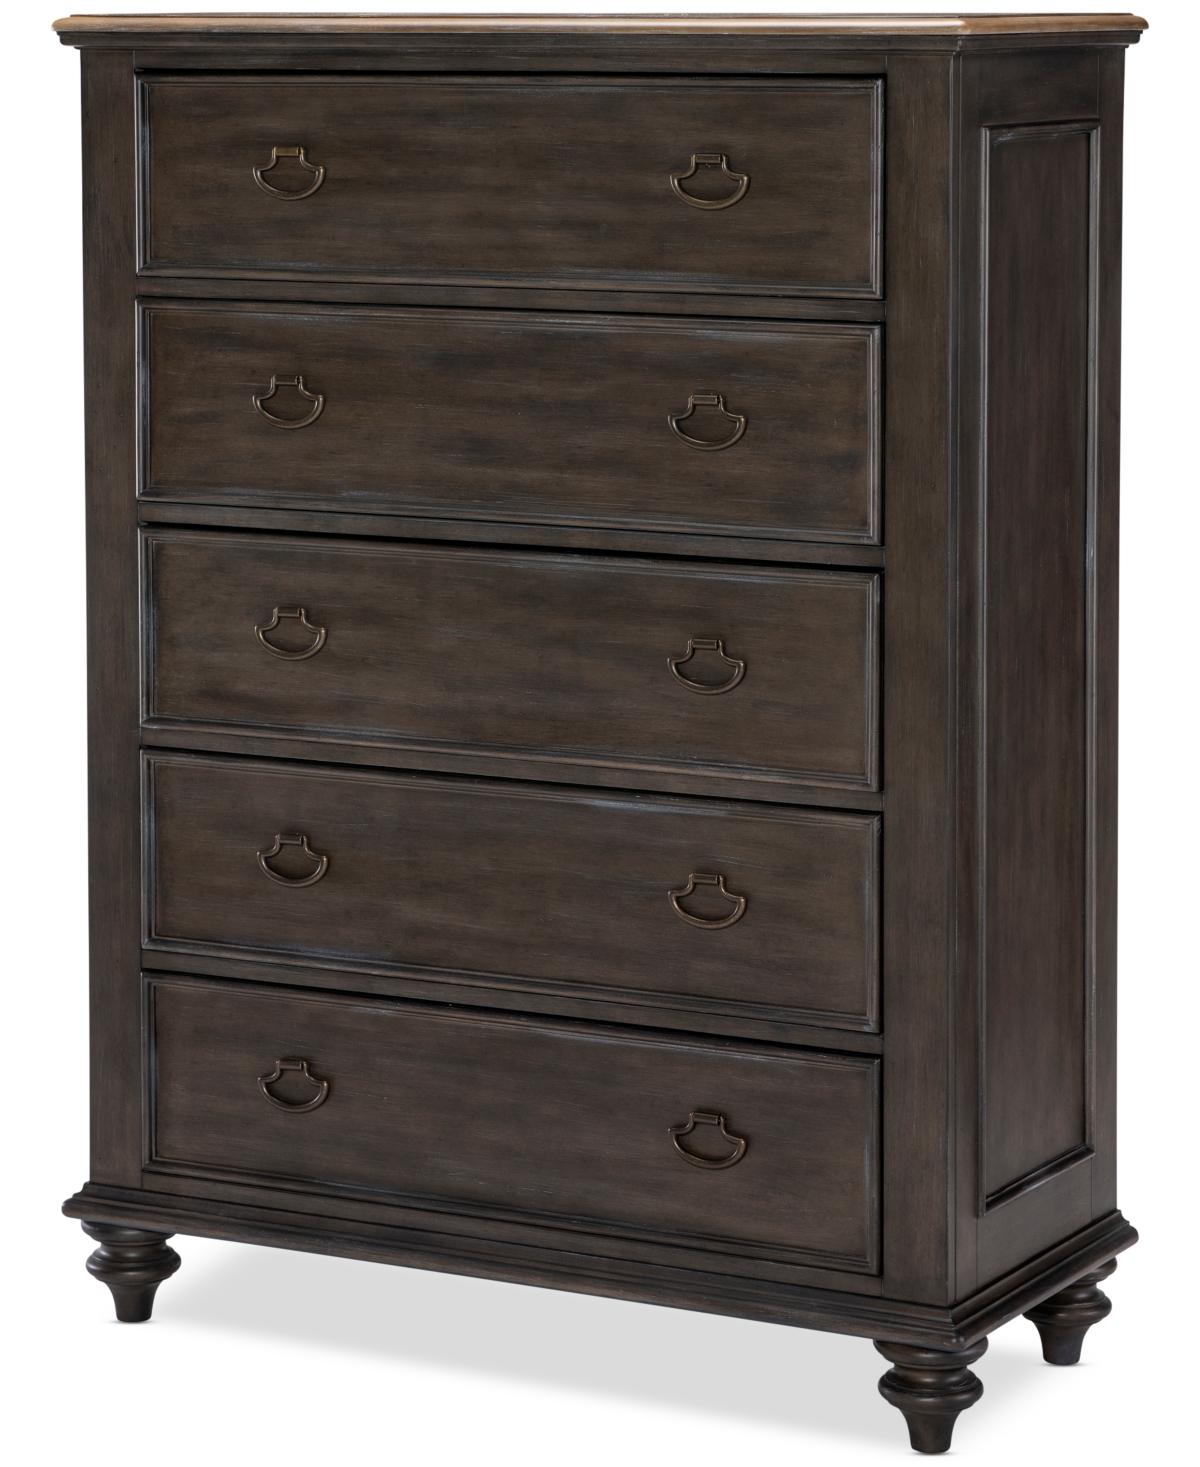 Macy's Mandeville Drawer Chest In Brown